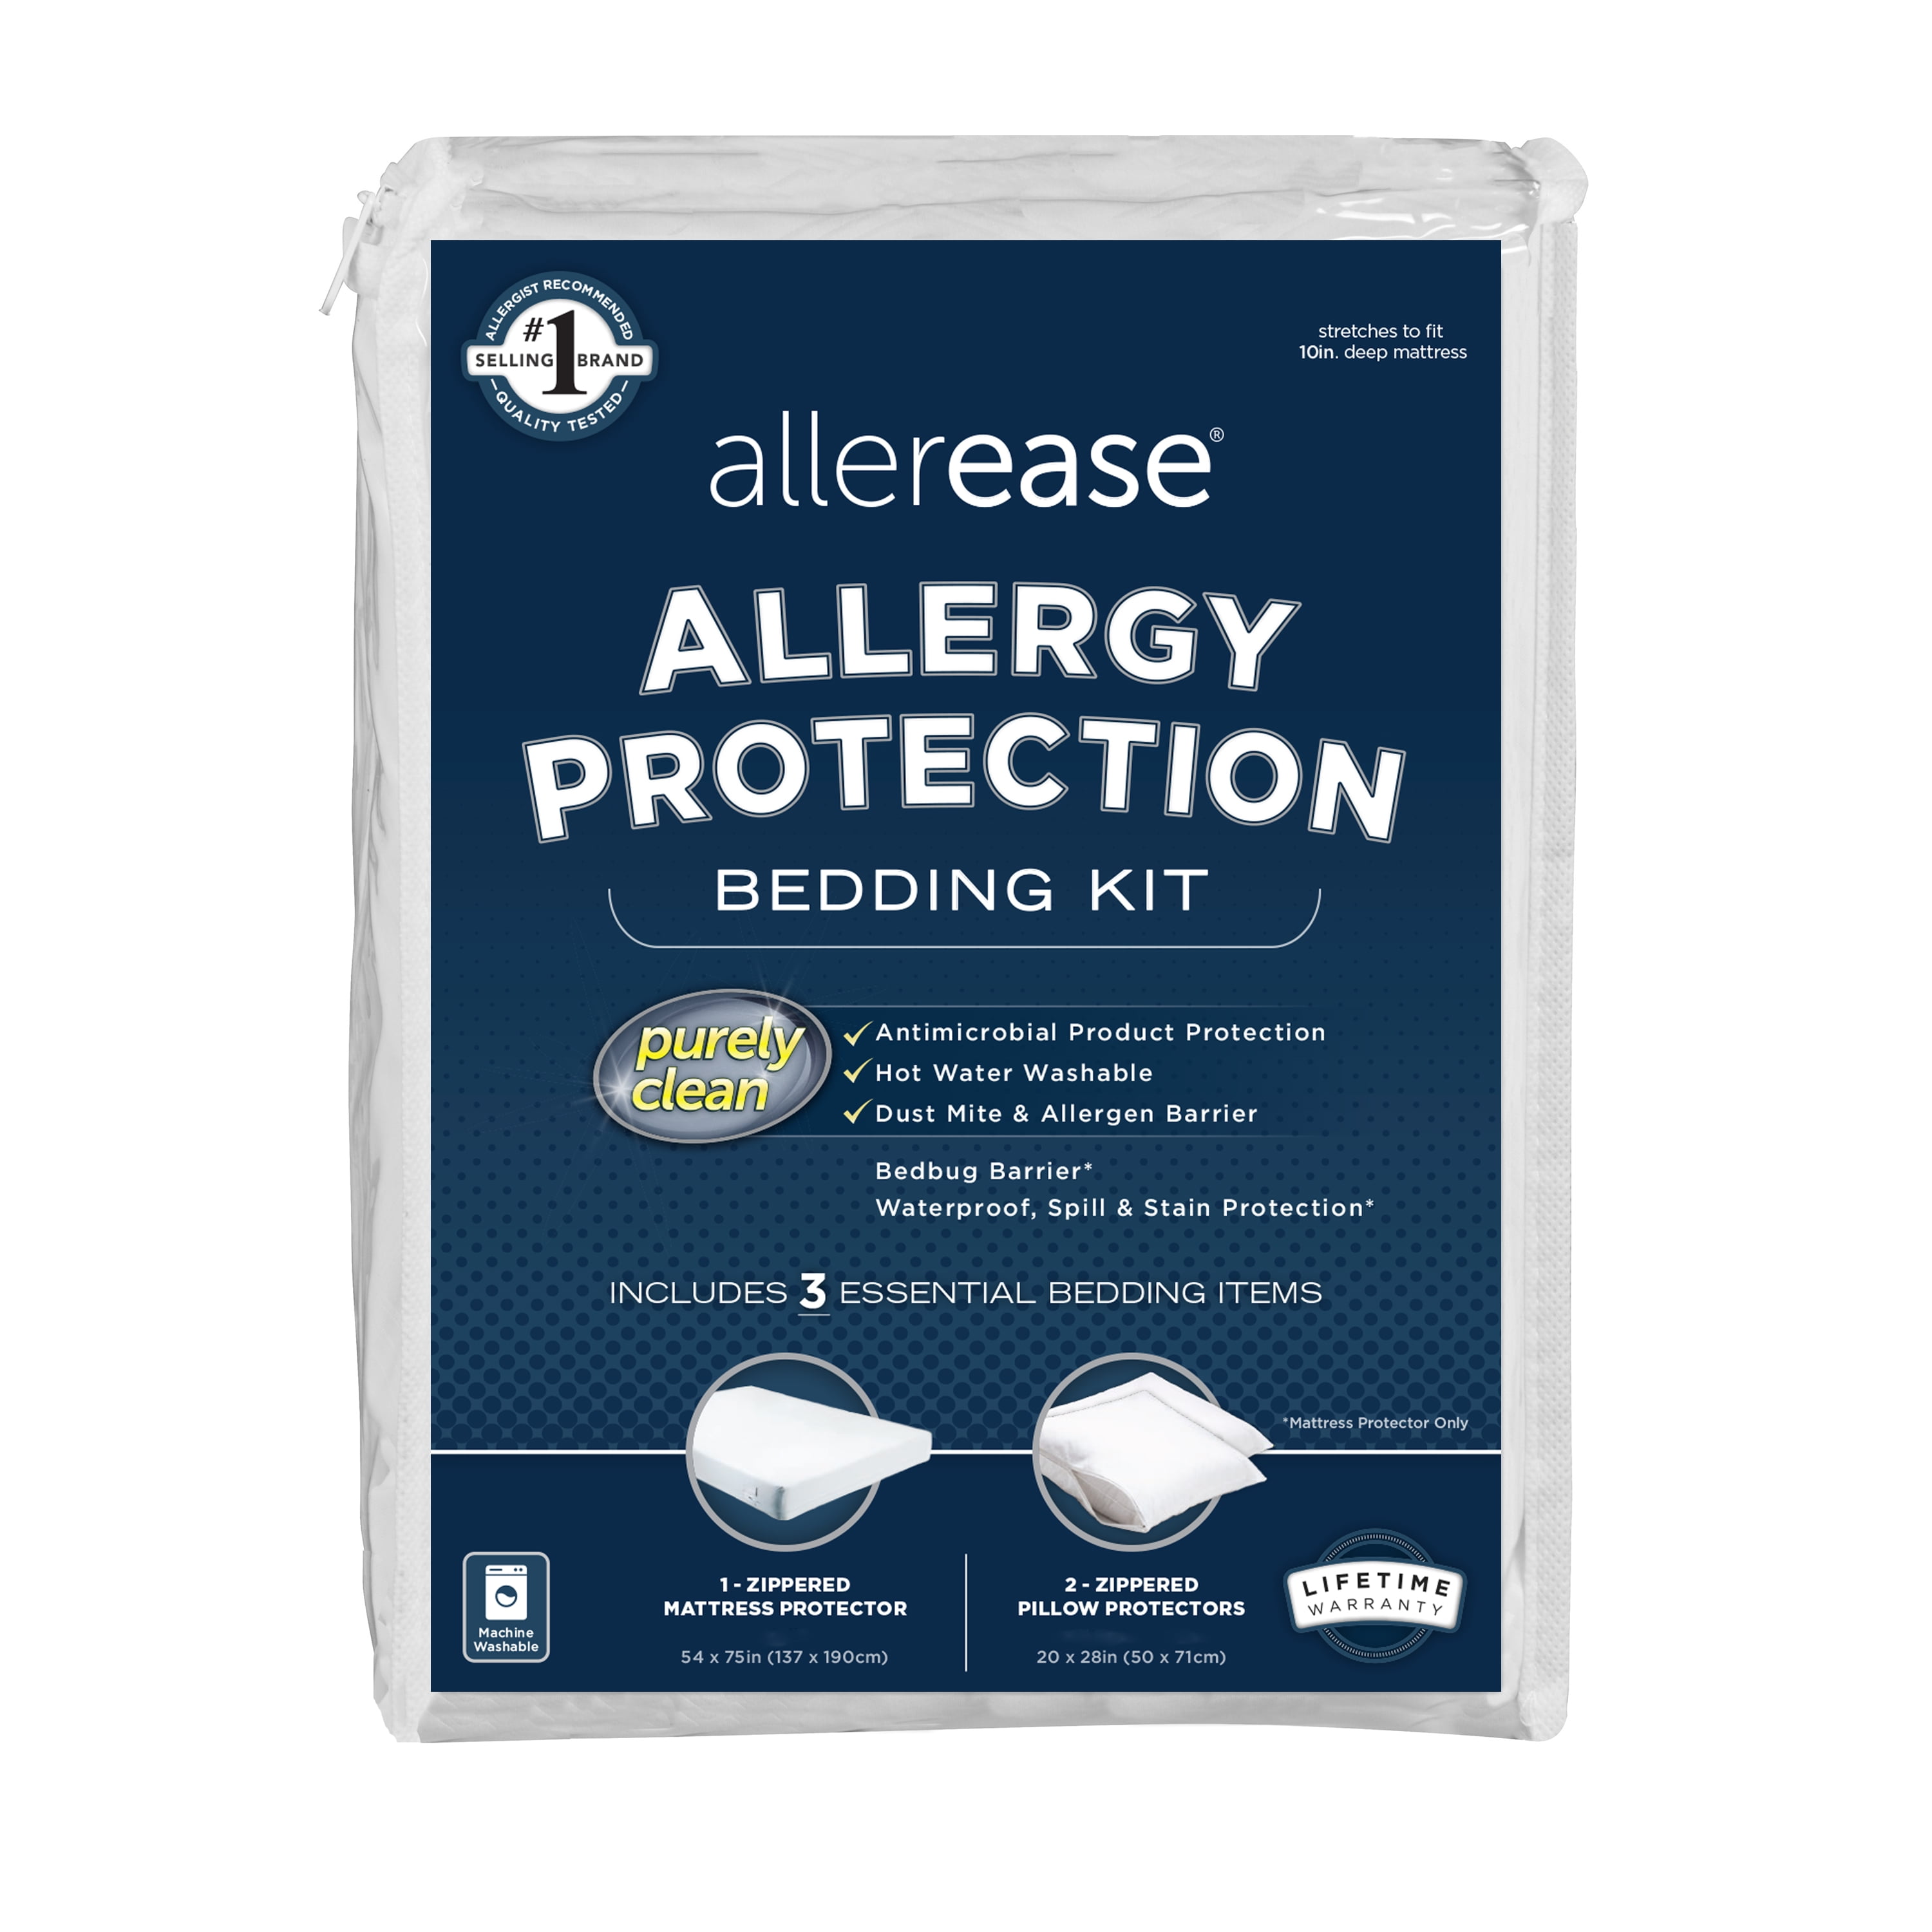 NEW AllerEase Size XL-Twin Zippered Mattress & Pillow Protector Bed Bug Kit 